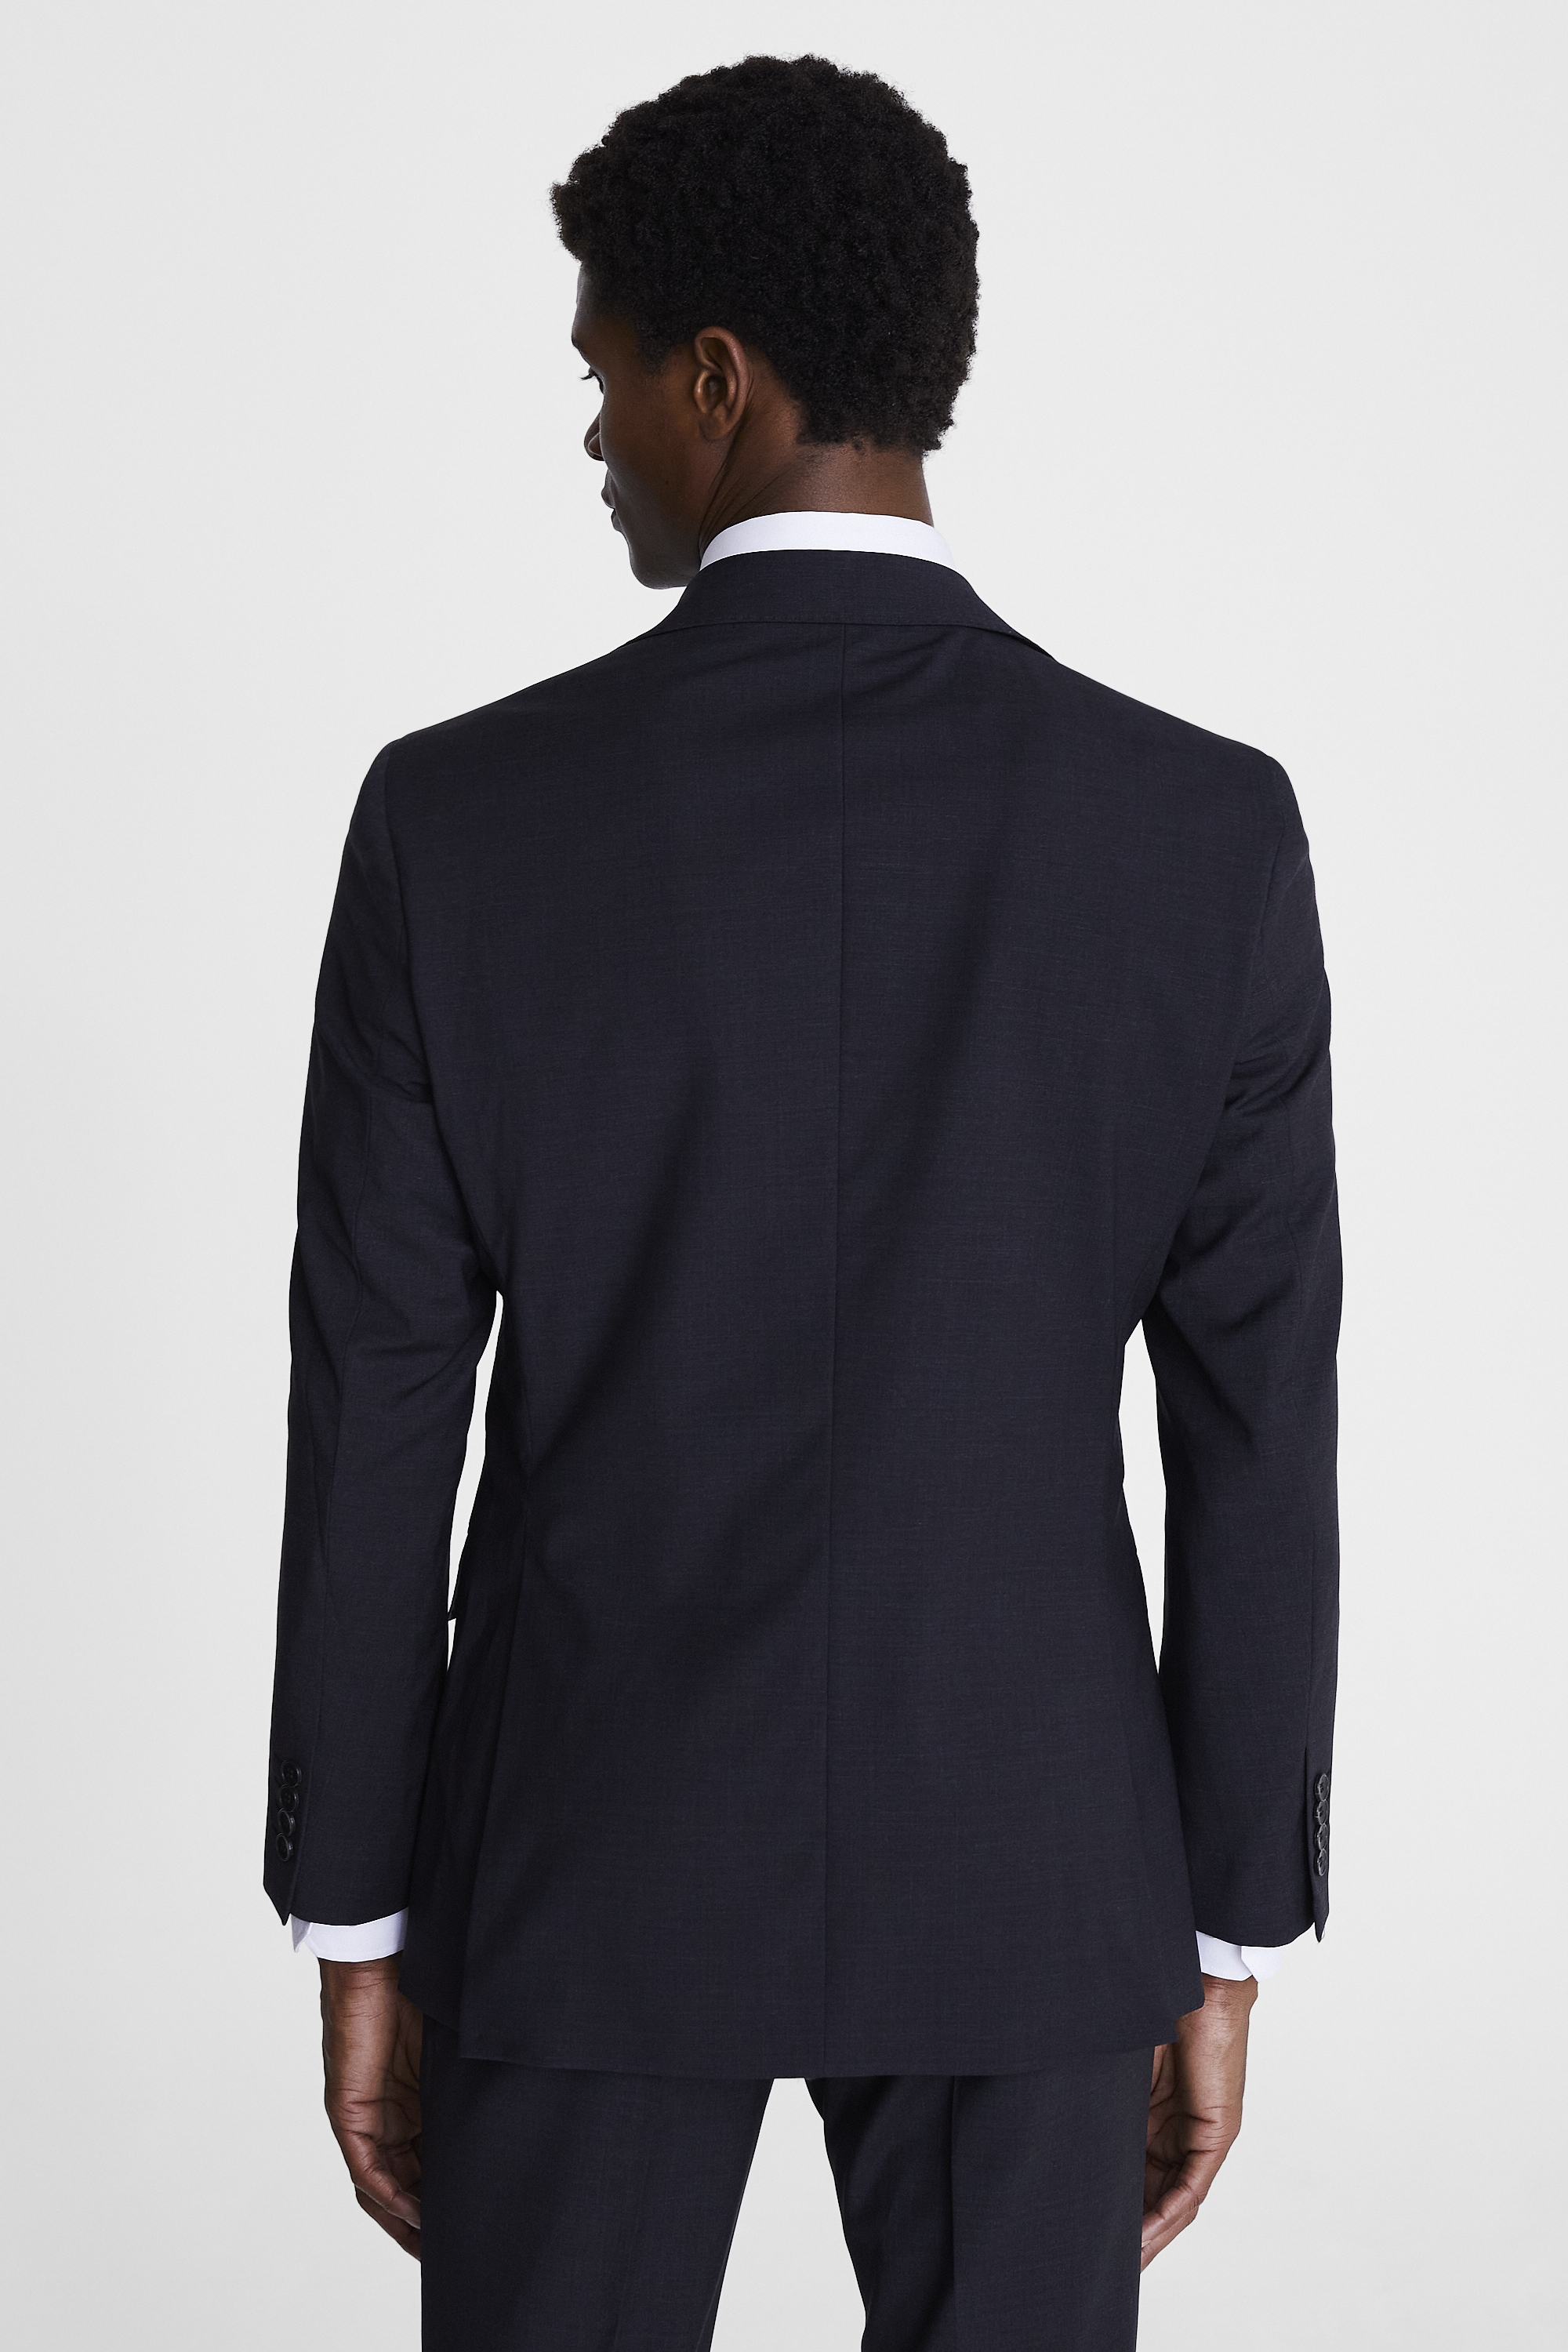 Tailored Fit Charcoal Performance Jacket | Buy Online at Moss